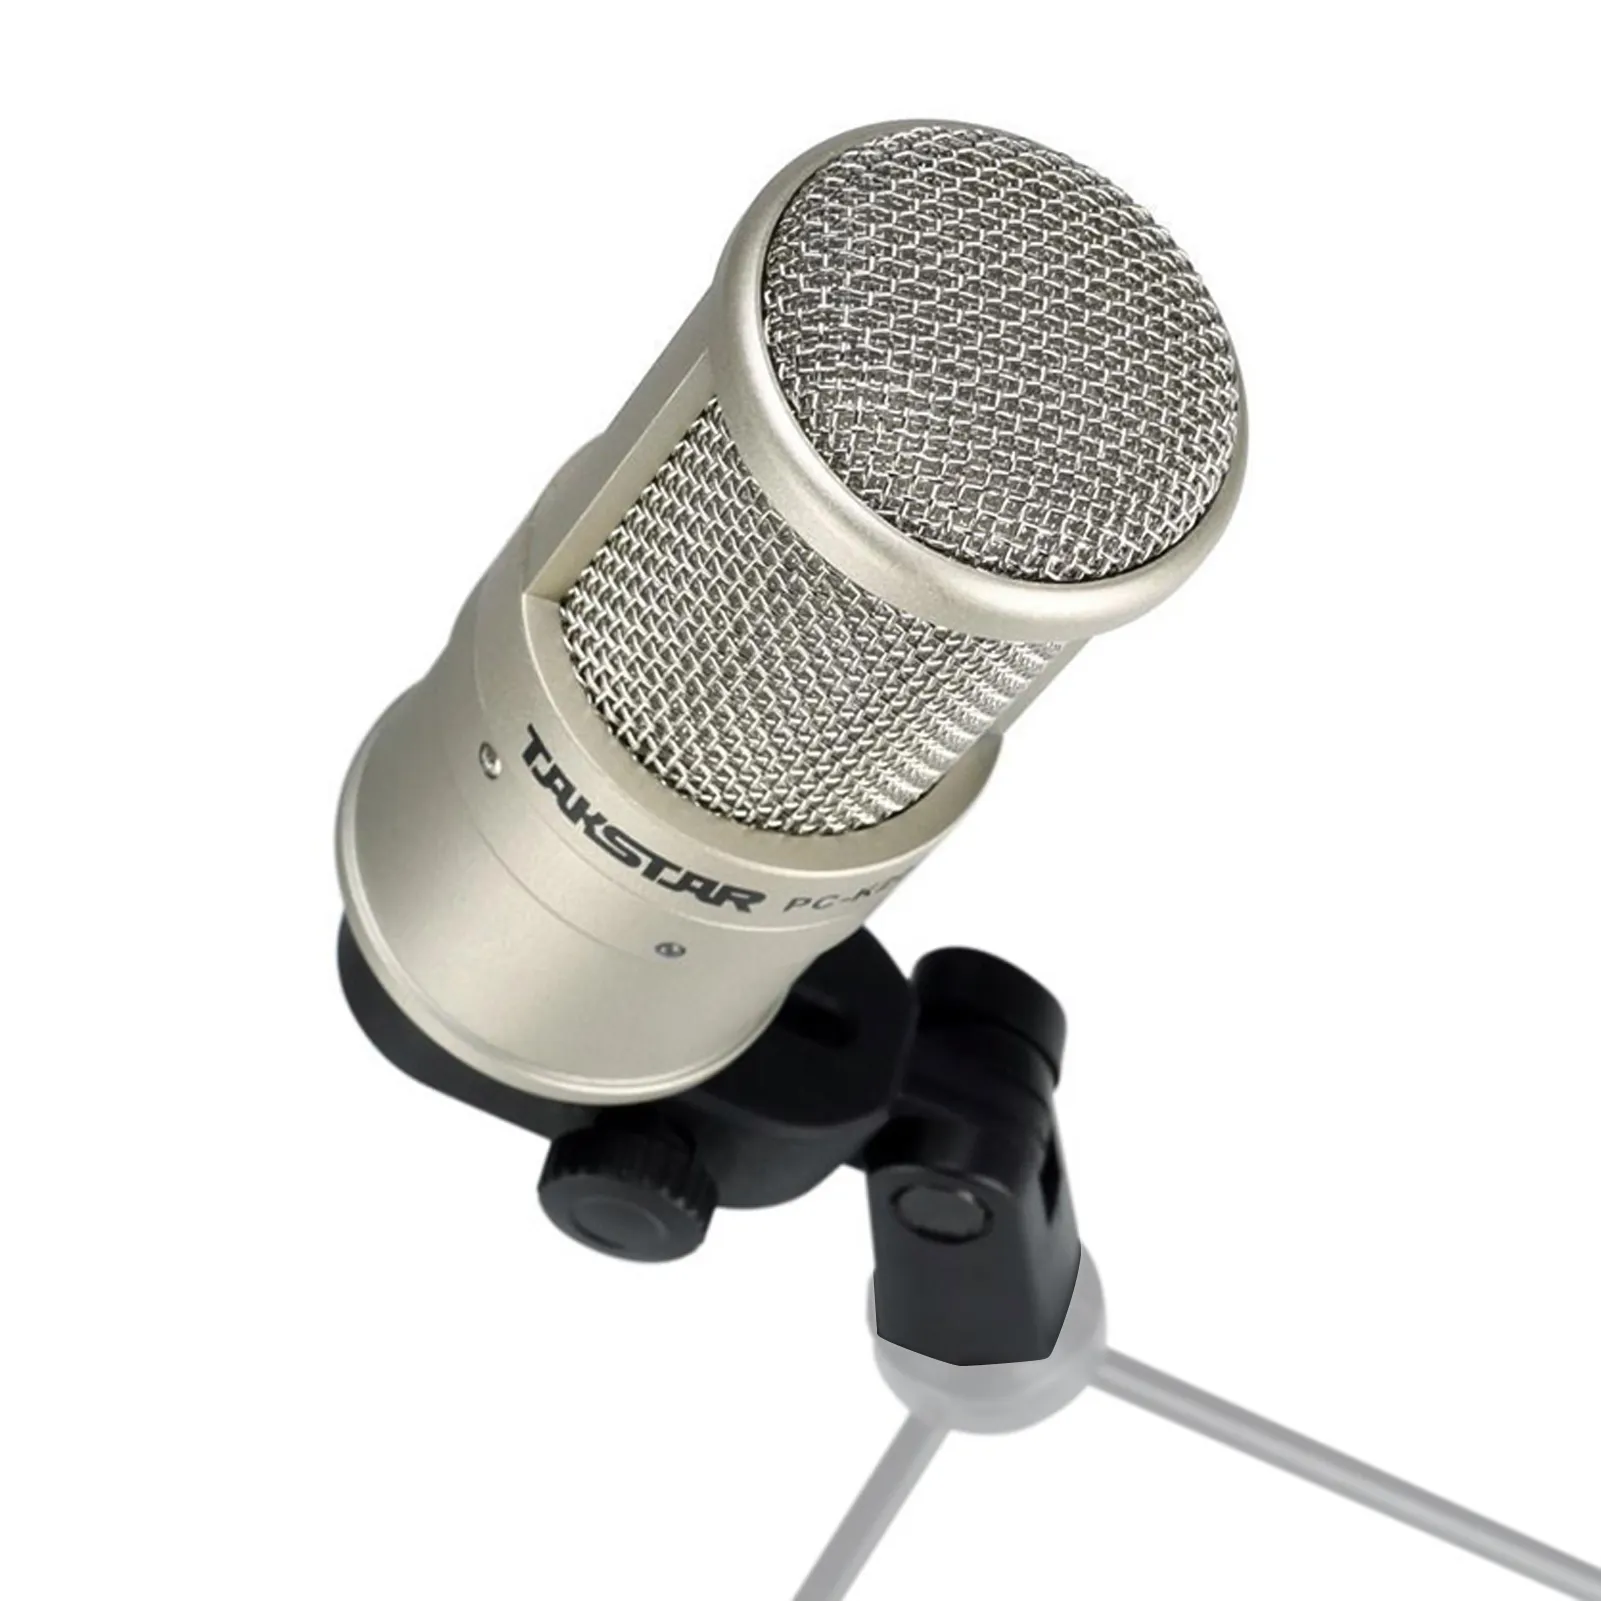 PC-K200 Cardioid-directional Condenser Recording Microphone Metal Structure Wide Frequency Response with Shock Mount for